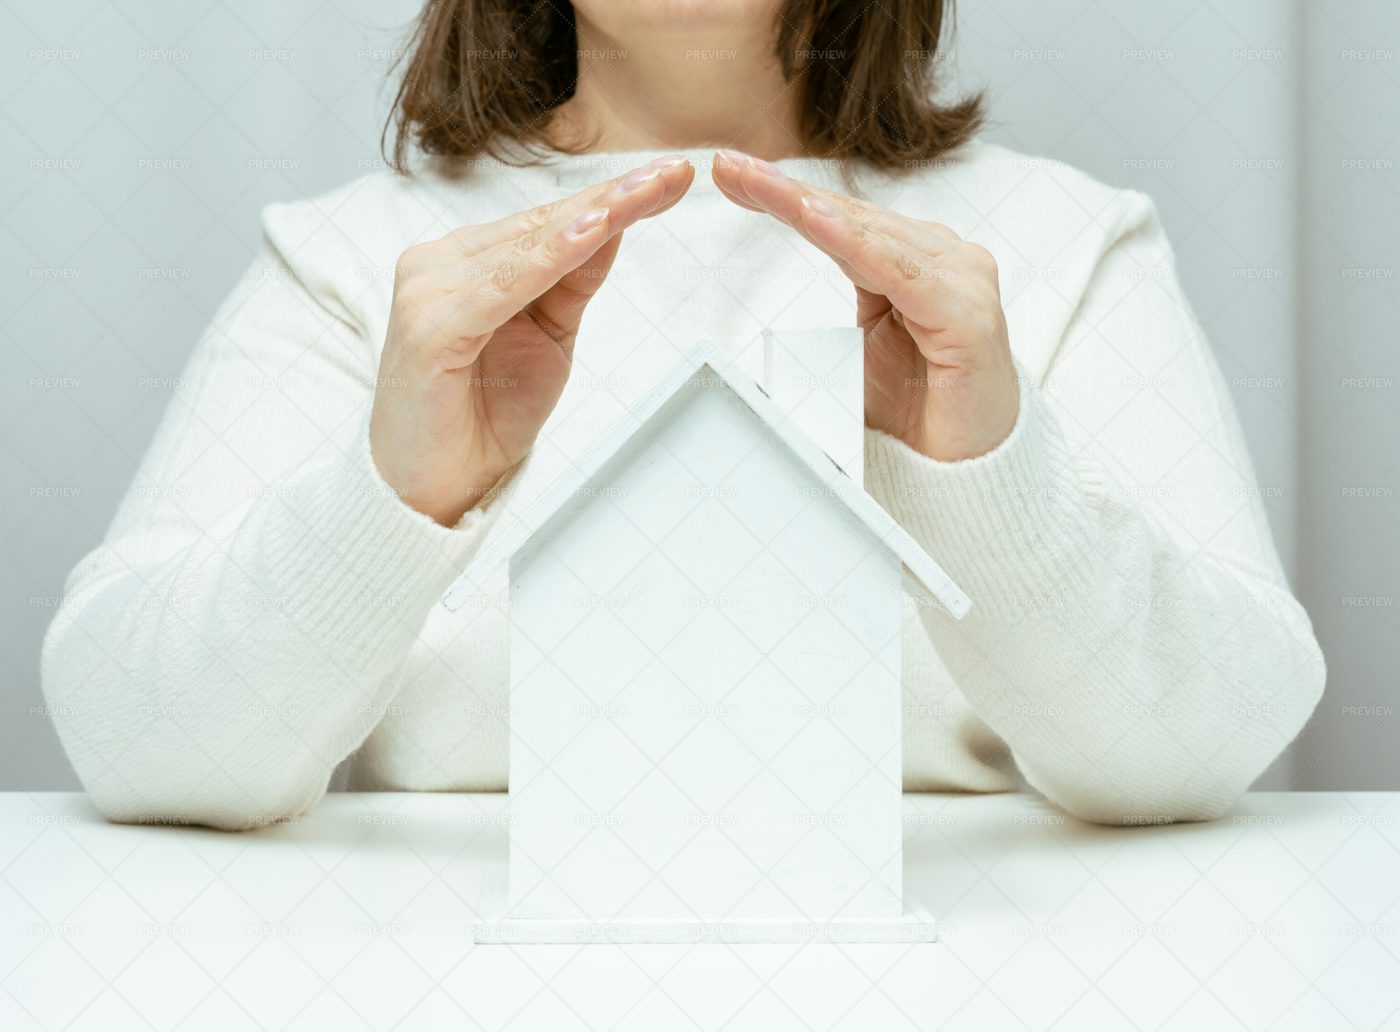 Hands Folded Above A Model House: Stock Photos